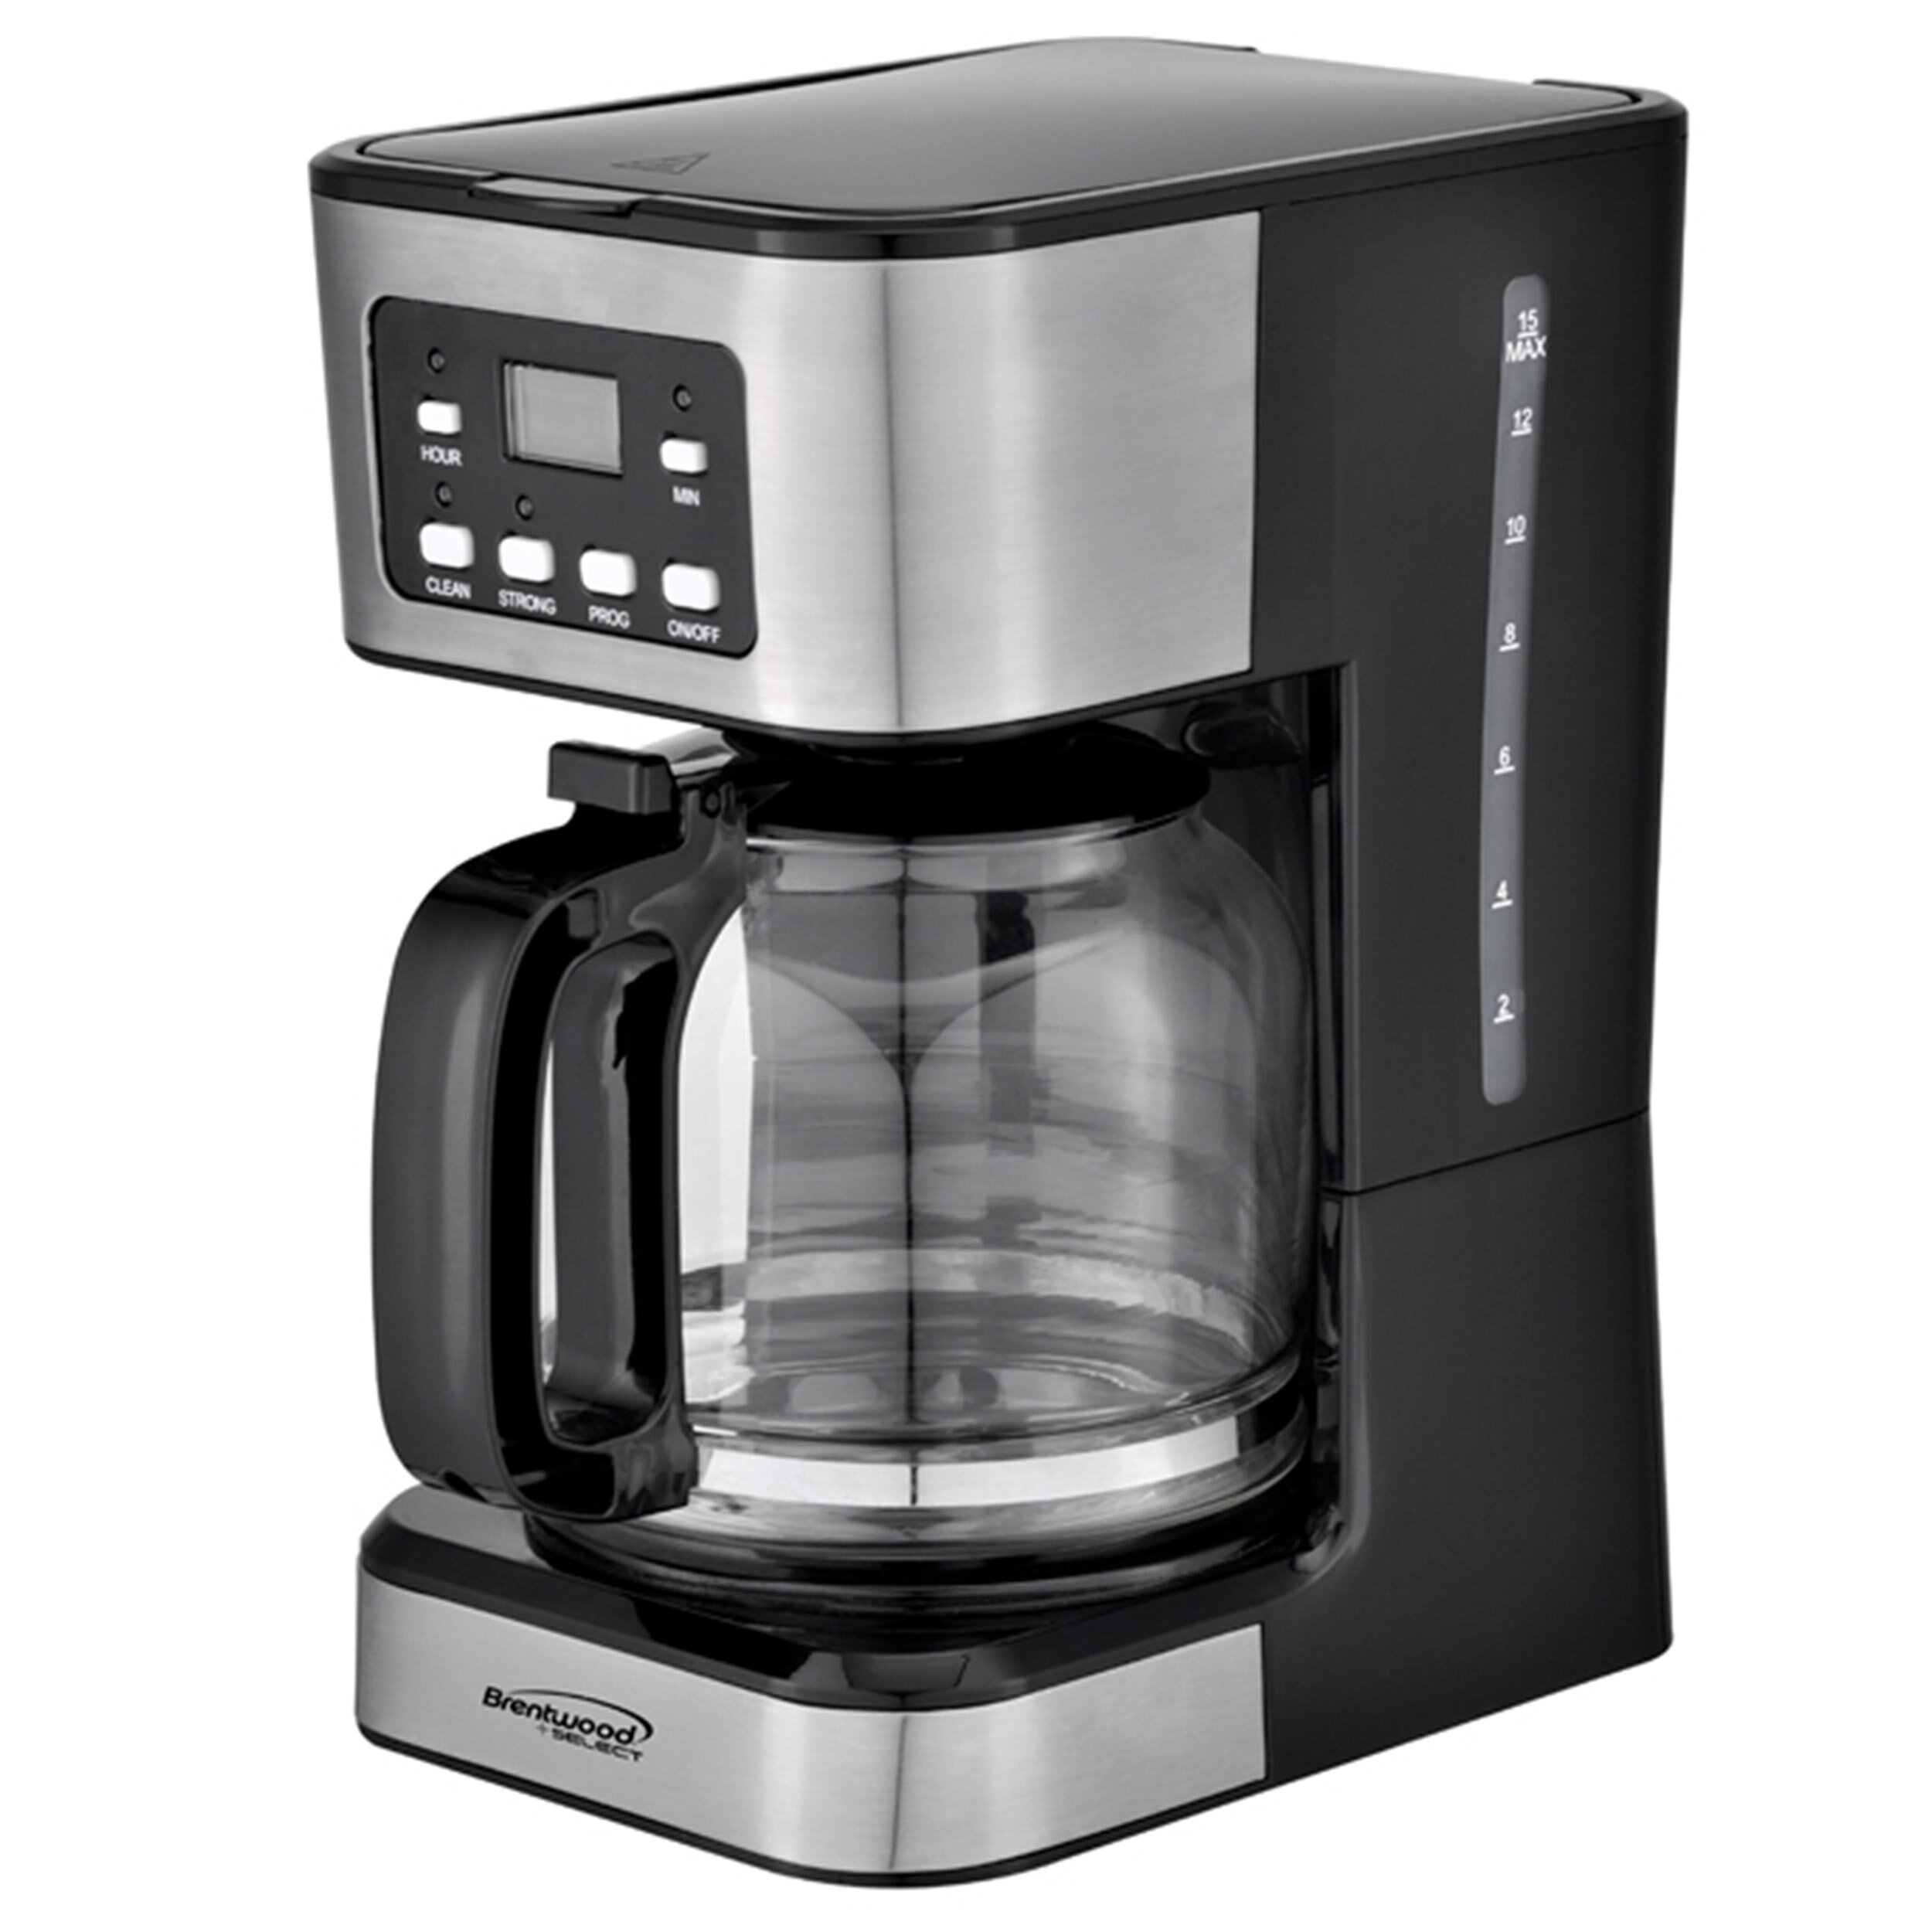 Capresso SG300 12-Cup Stainless Steel - Coffee Maker